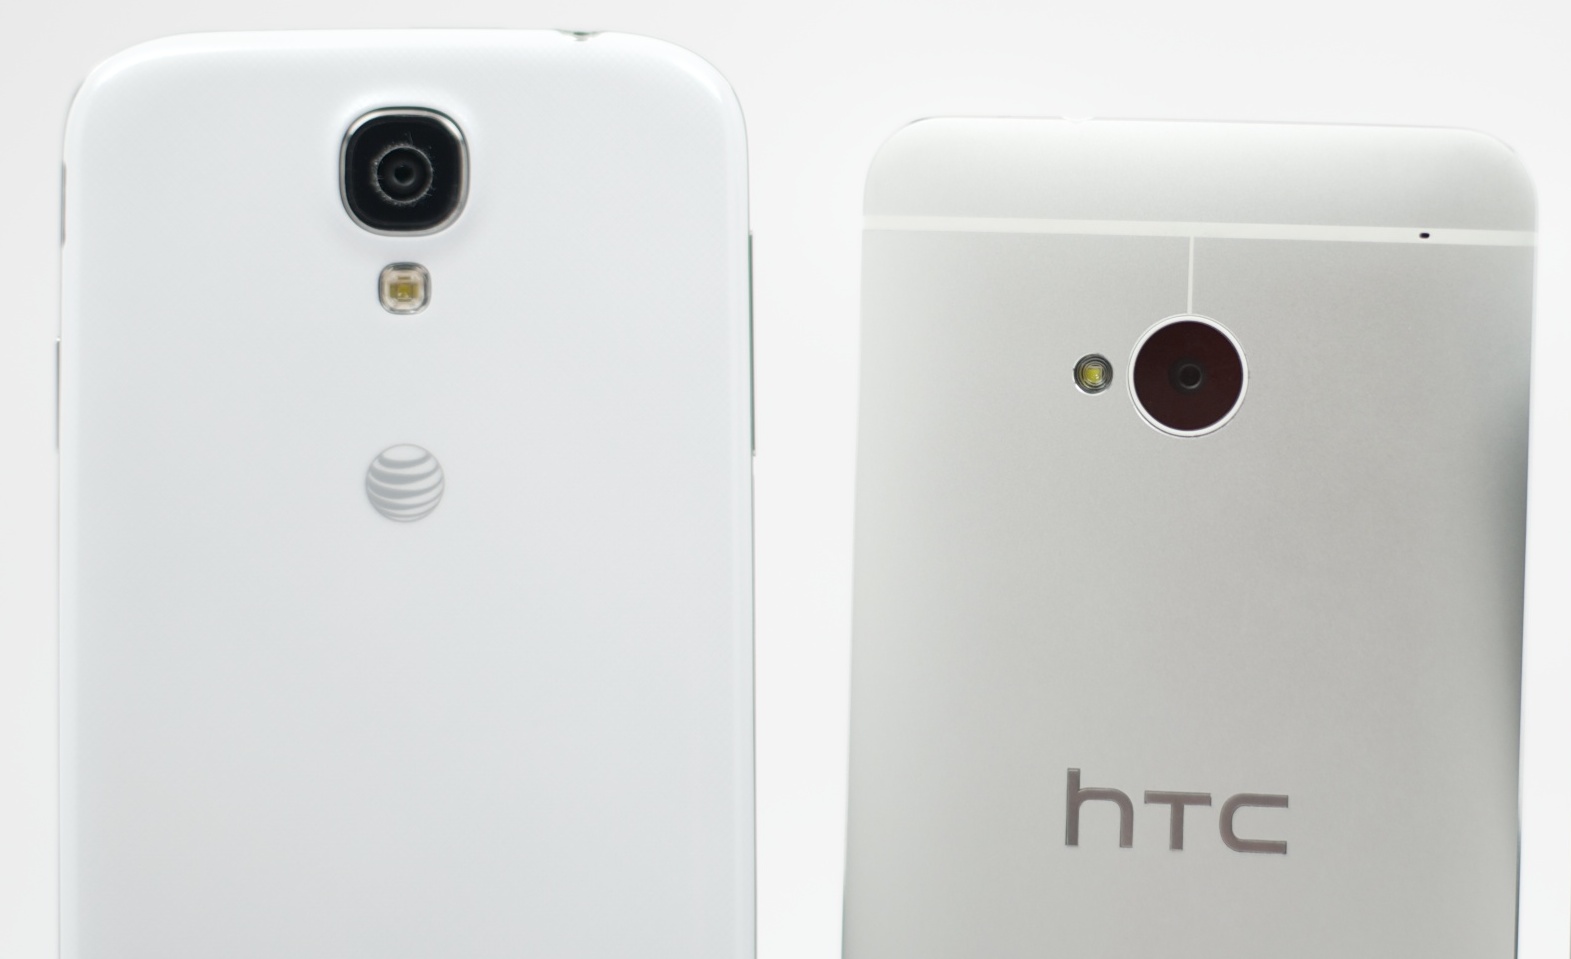 Better build quality and less obtrusive software features drew me to the HTC One.